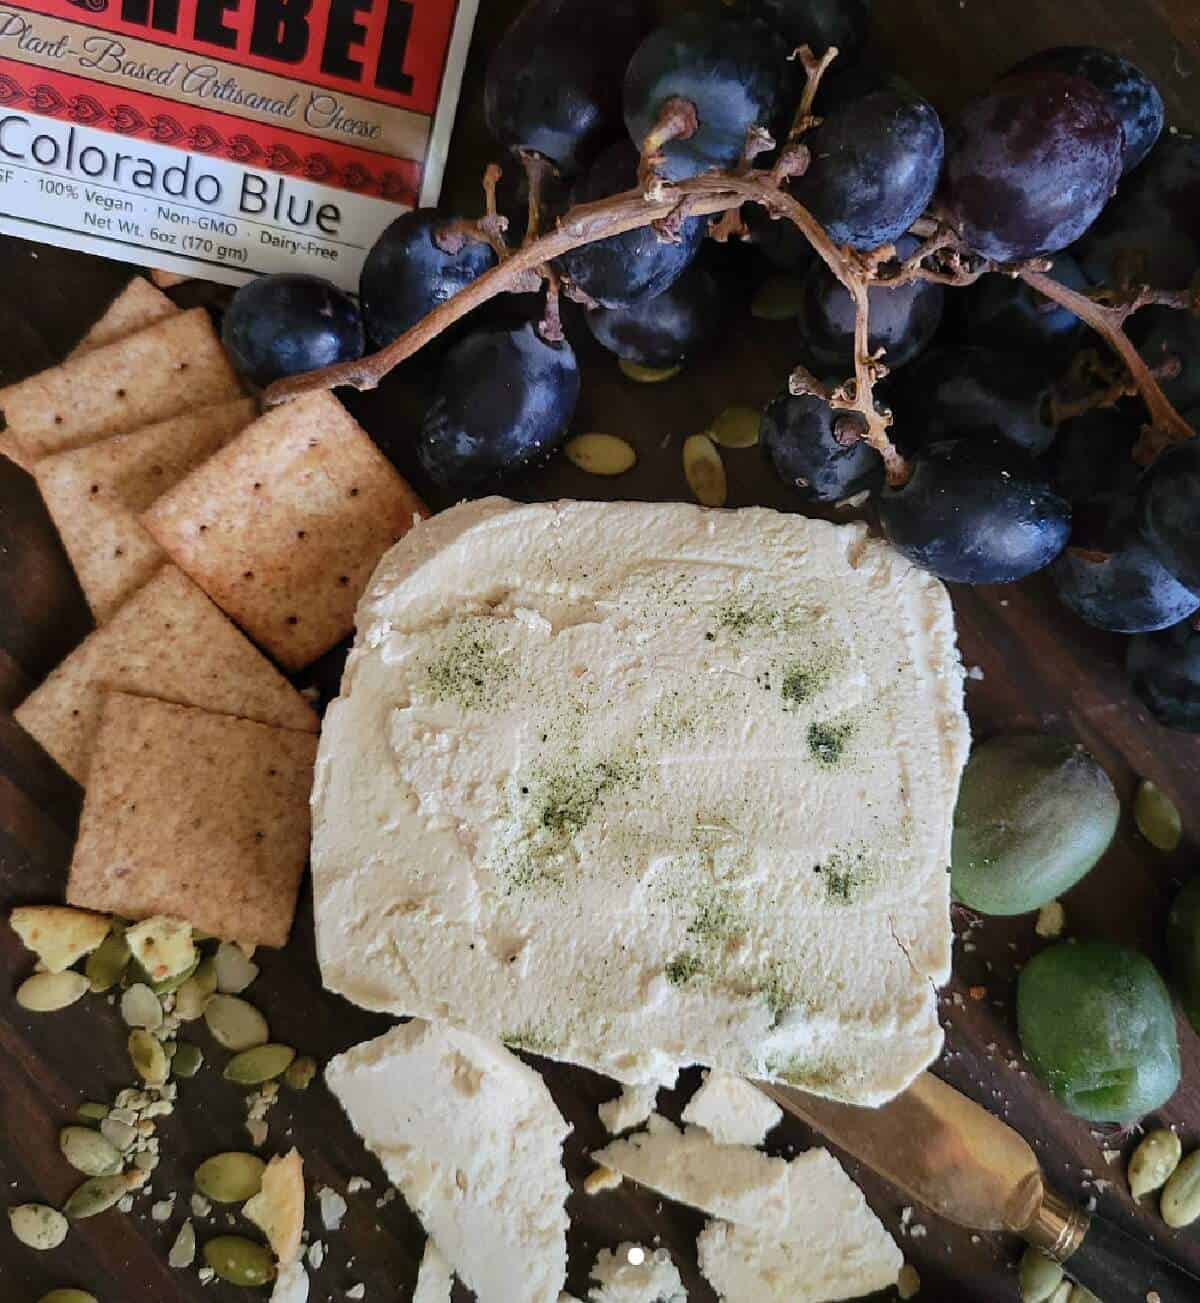 A large square of Peaceful Rebel vegan blue cheese laying on top of an assortment of crackers, grapes, pumpkin seeds, and olives along with the cheese wrapper and a cheese knife. 